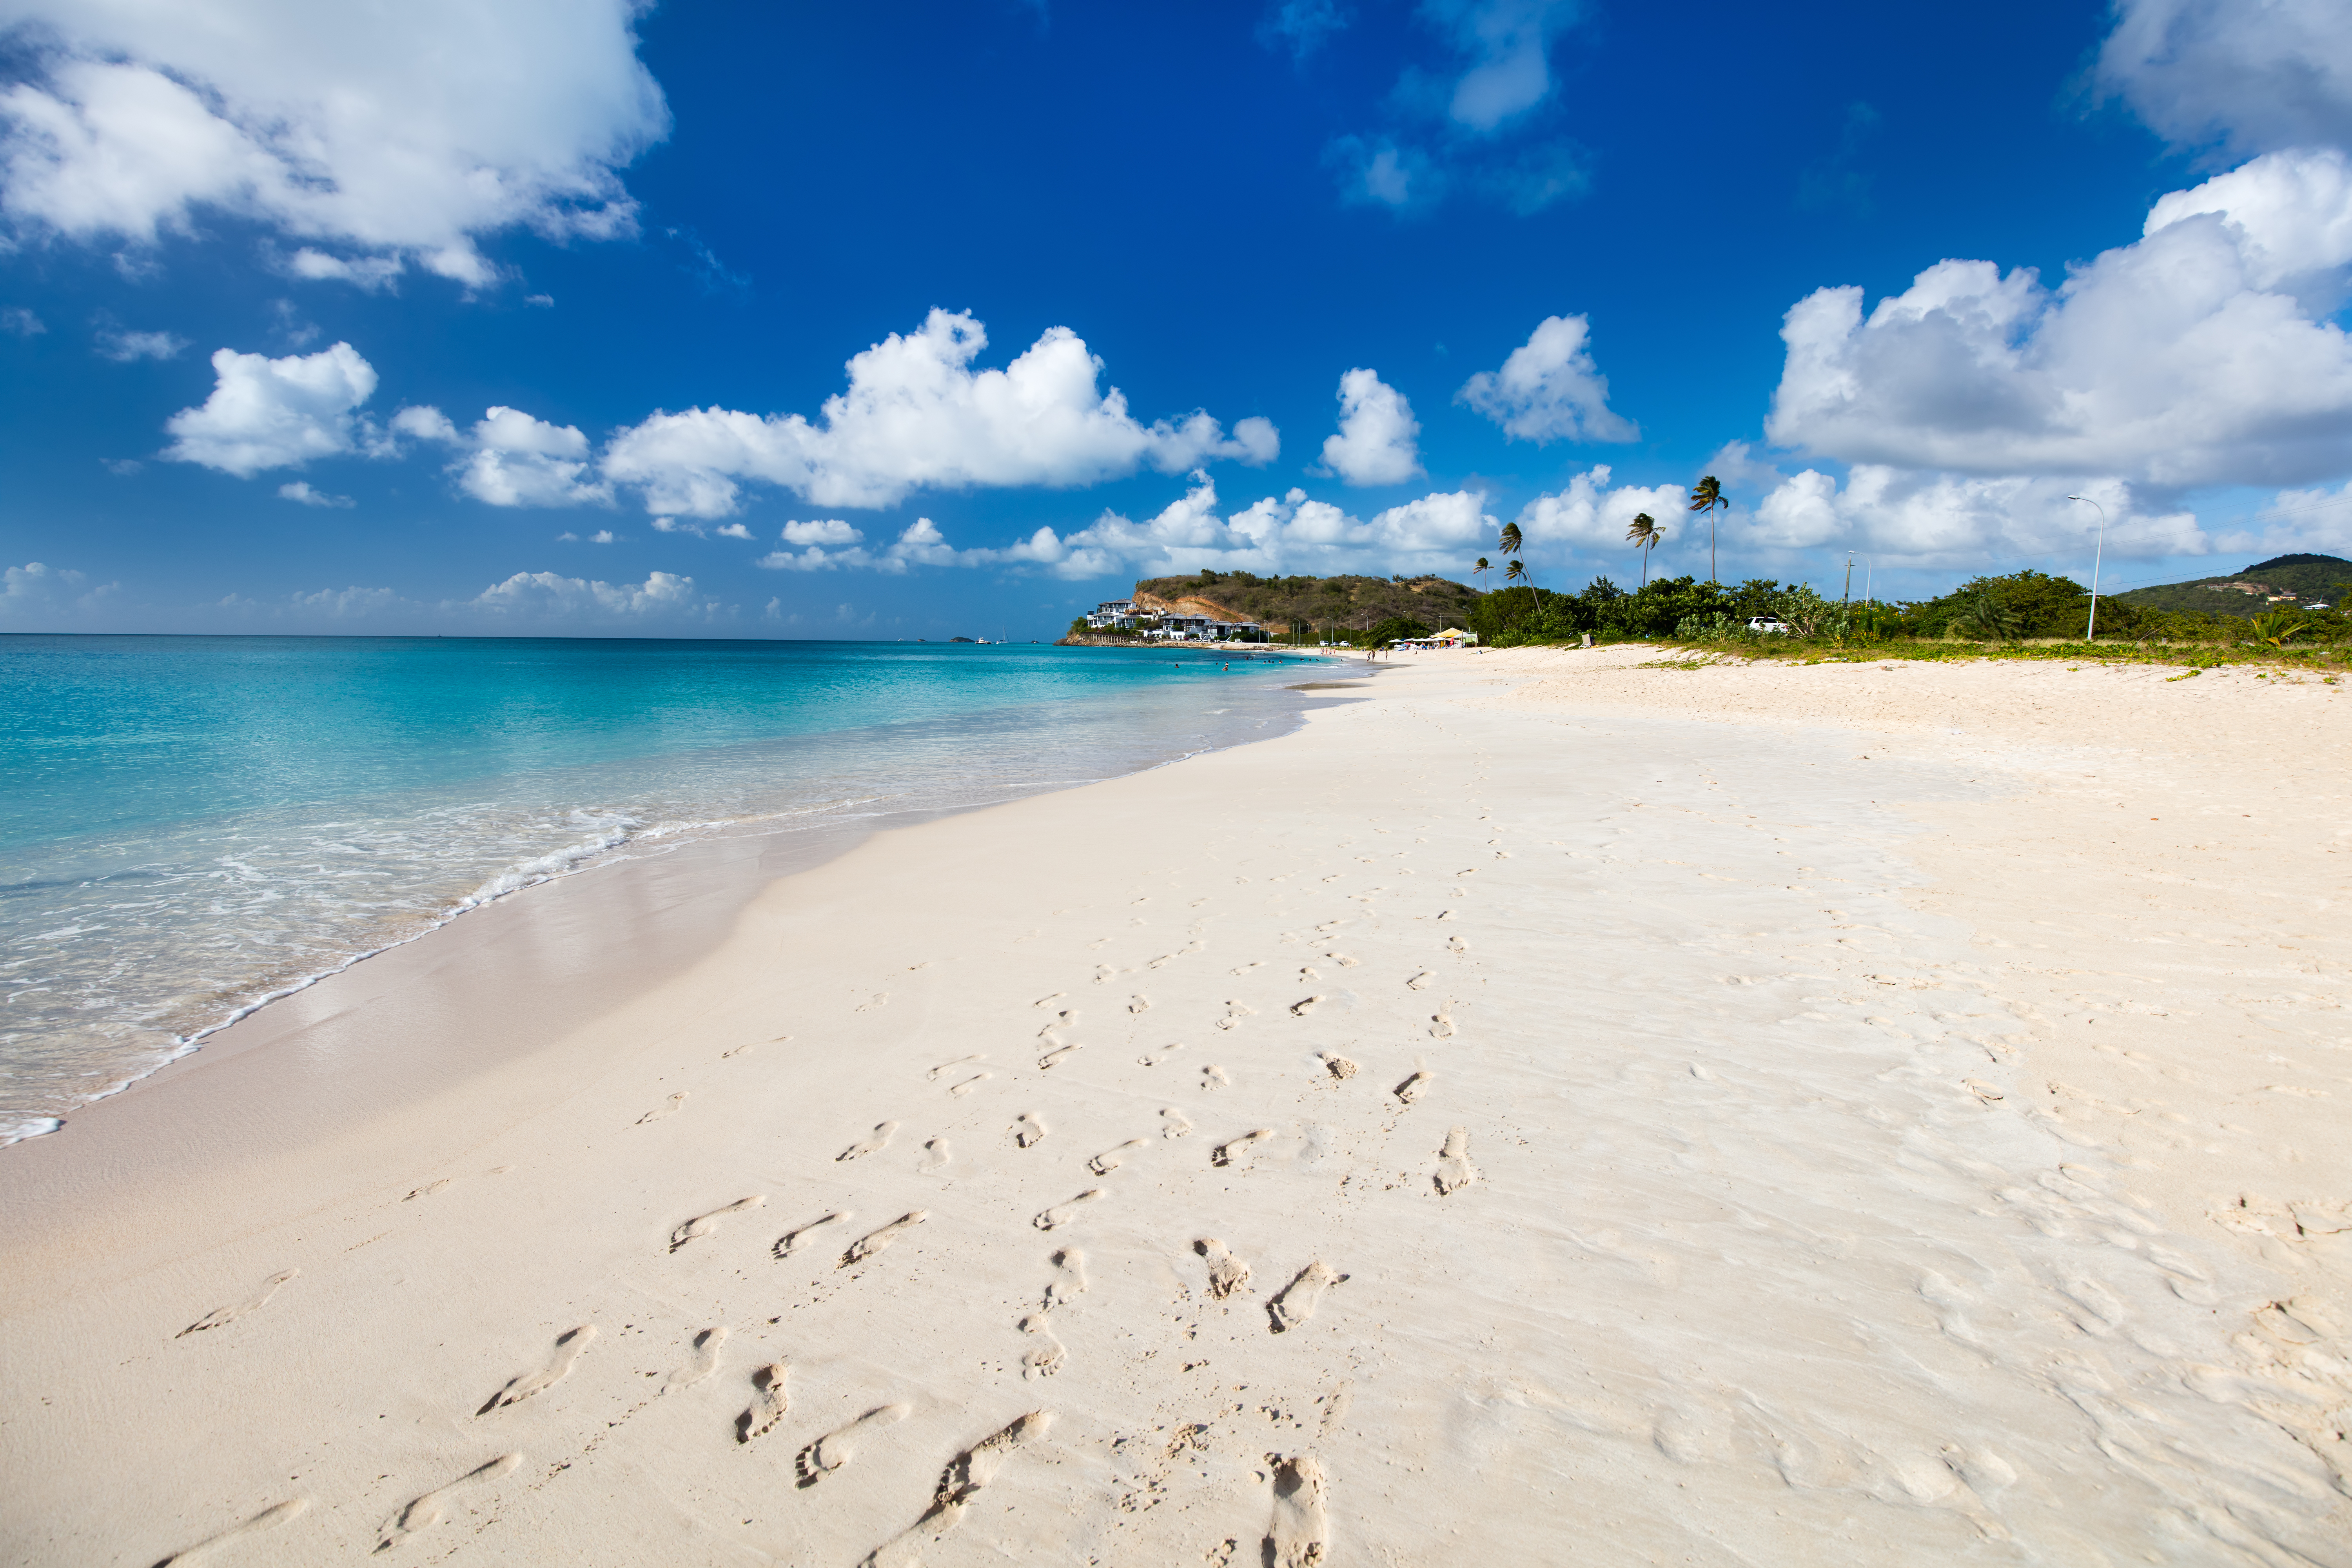 Darkwood Bay is among the best beaches in Antigua and Barbuda, according to Latitude.